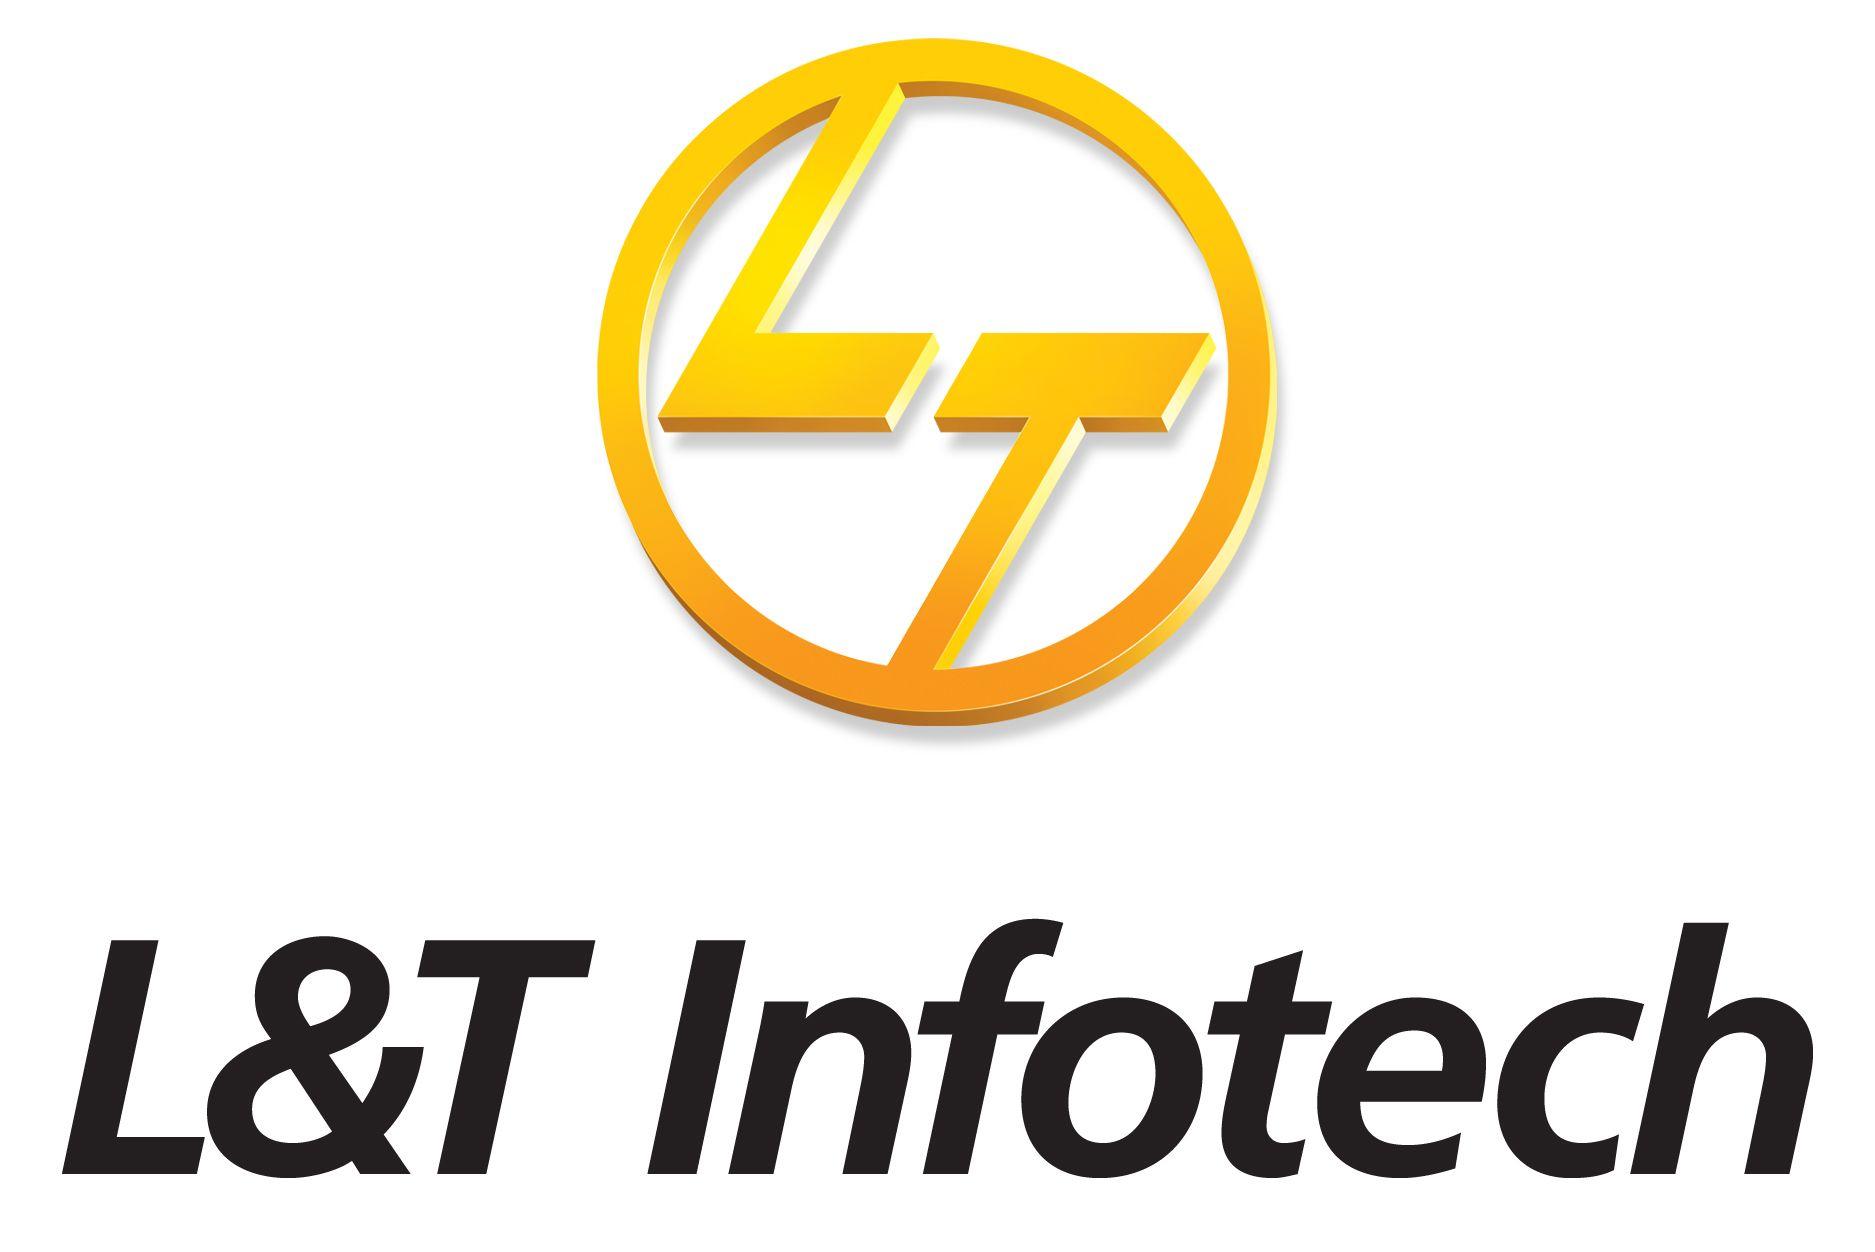 L&T Logo - L&T is india based company and have high value in global market